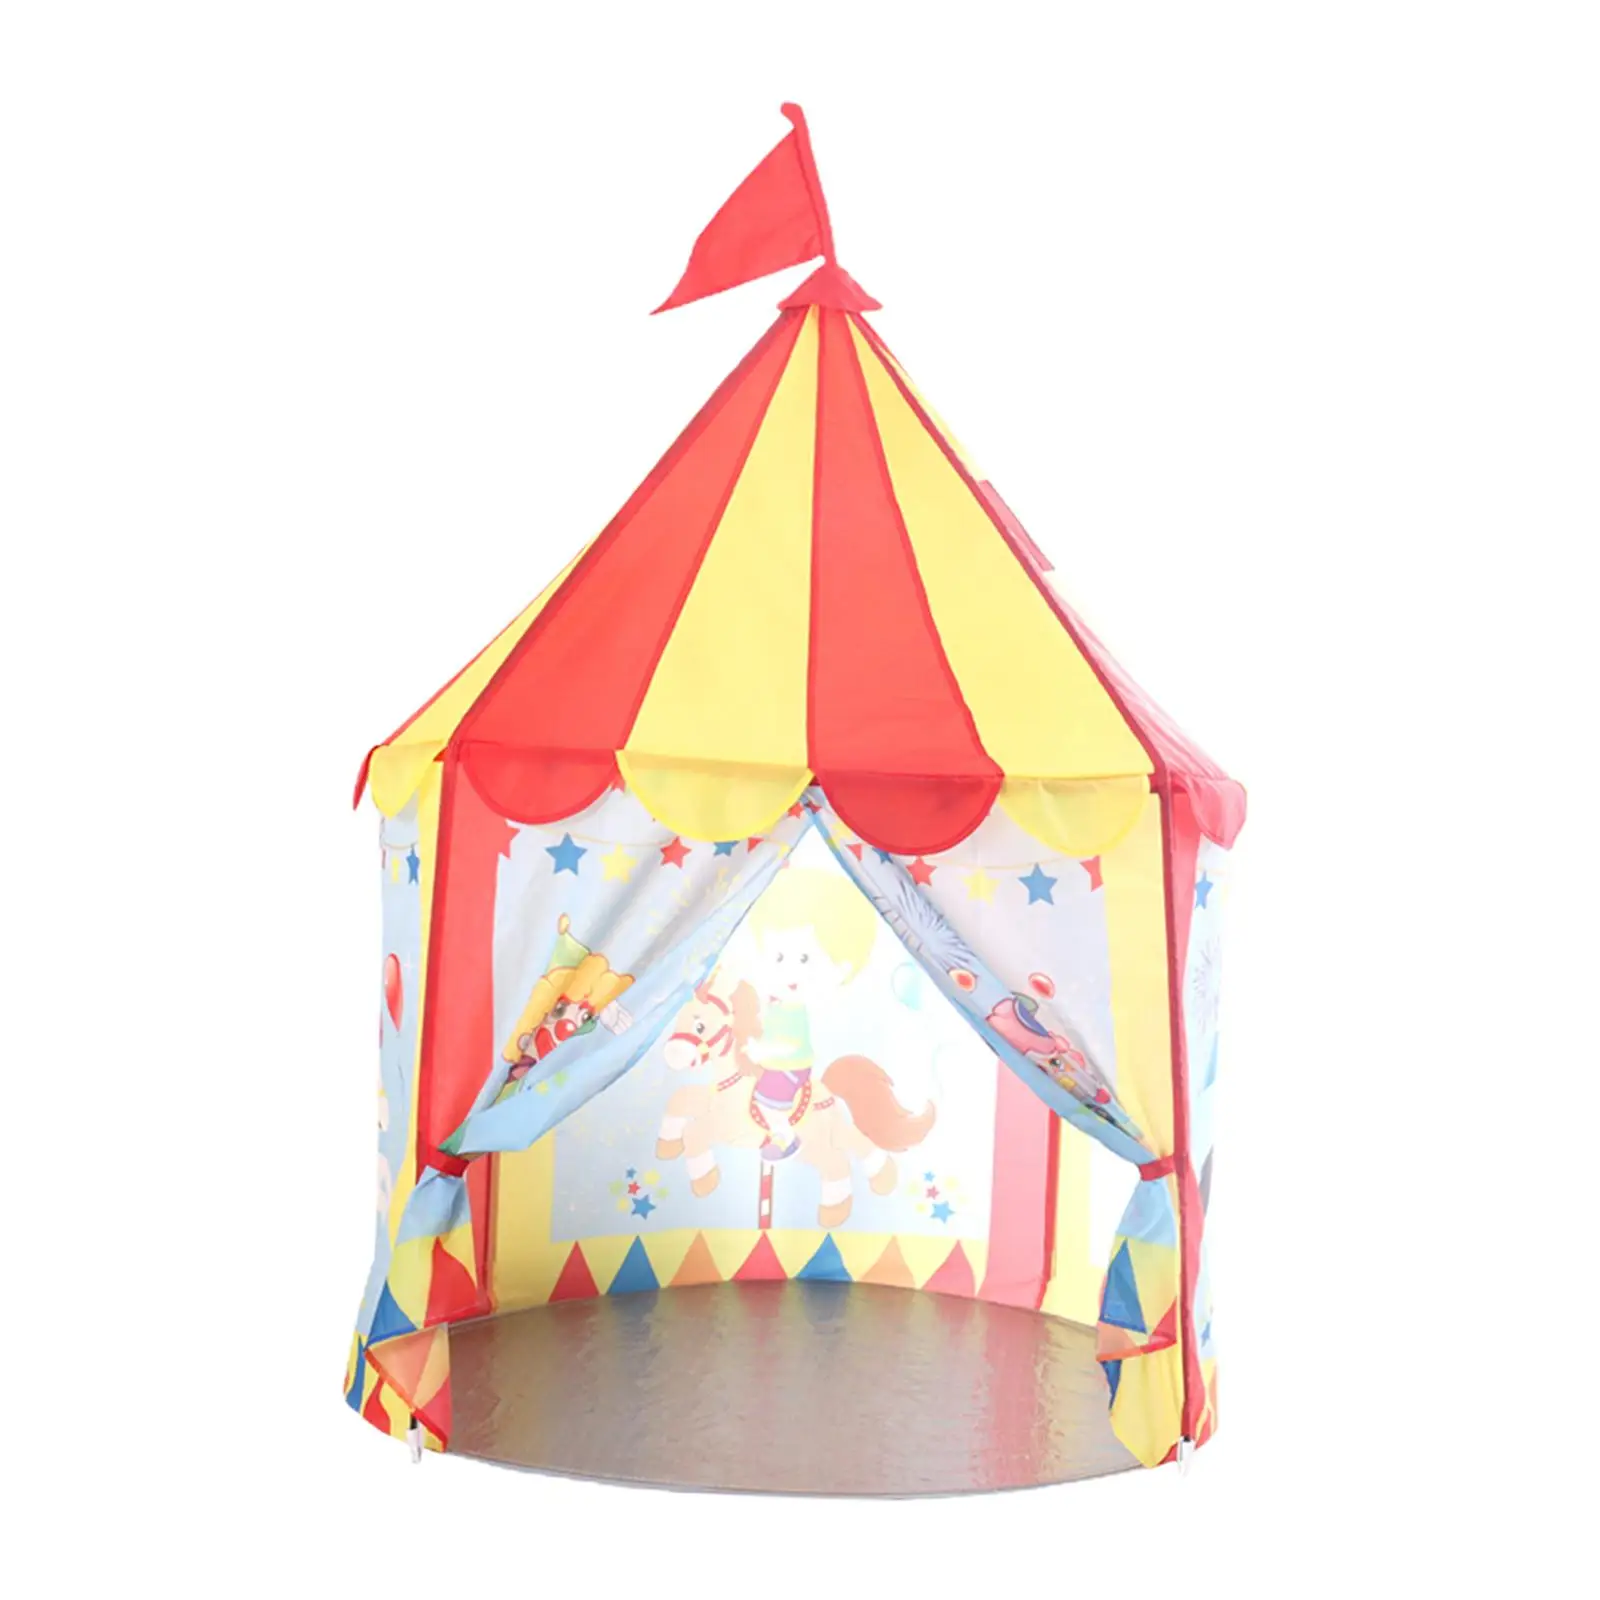 Kids Playhouse Play Teepee Foldable for Boys Girls Easy to Assemble Prince Castle Tent Play Tent for Home Garden Children Baby